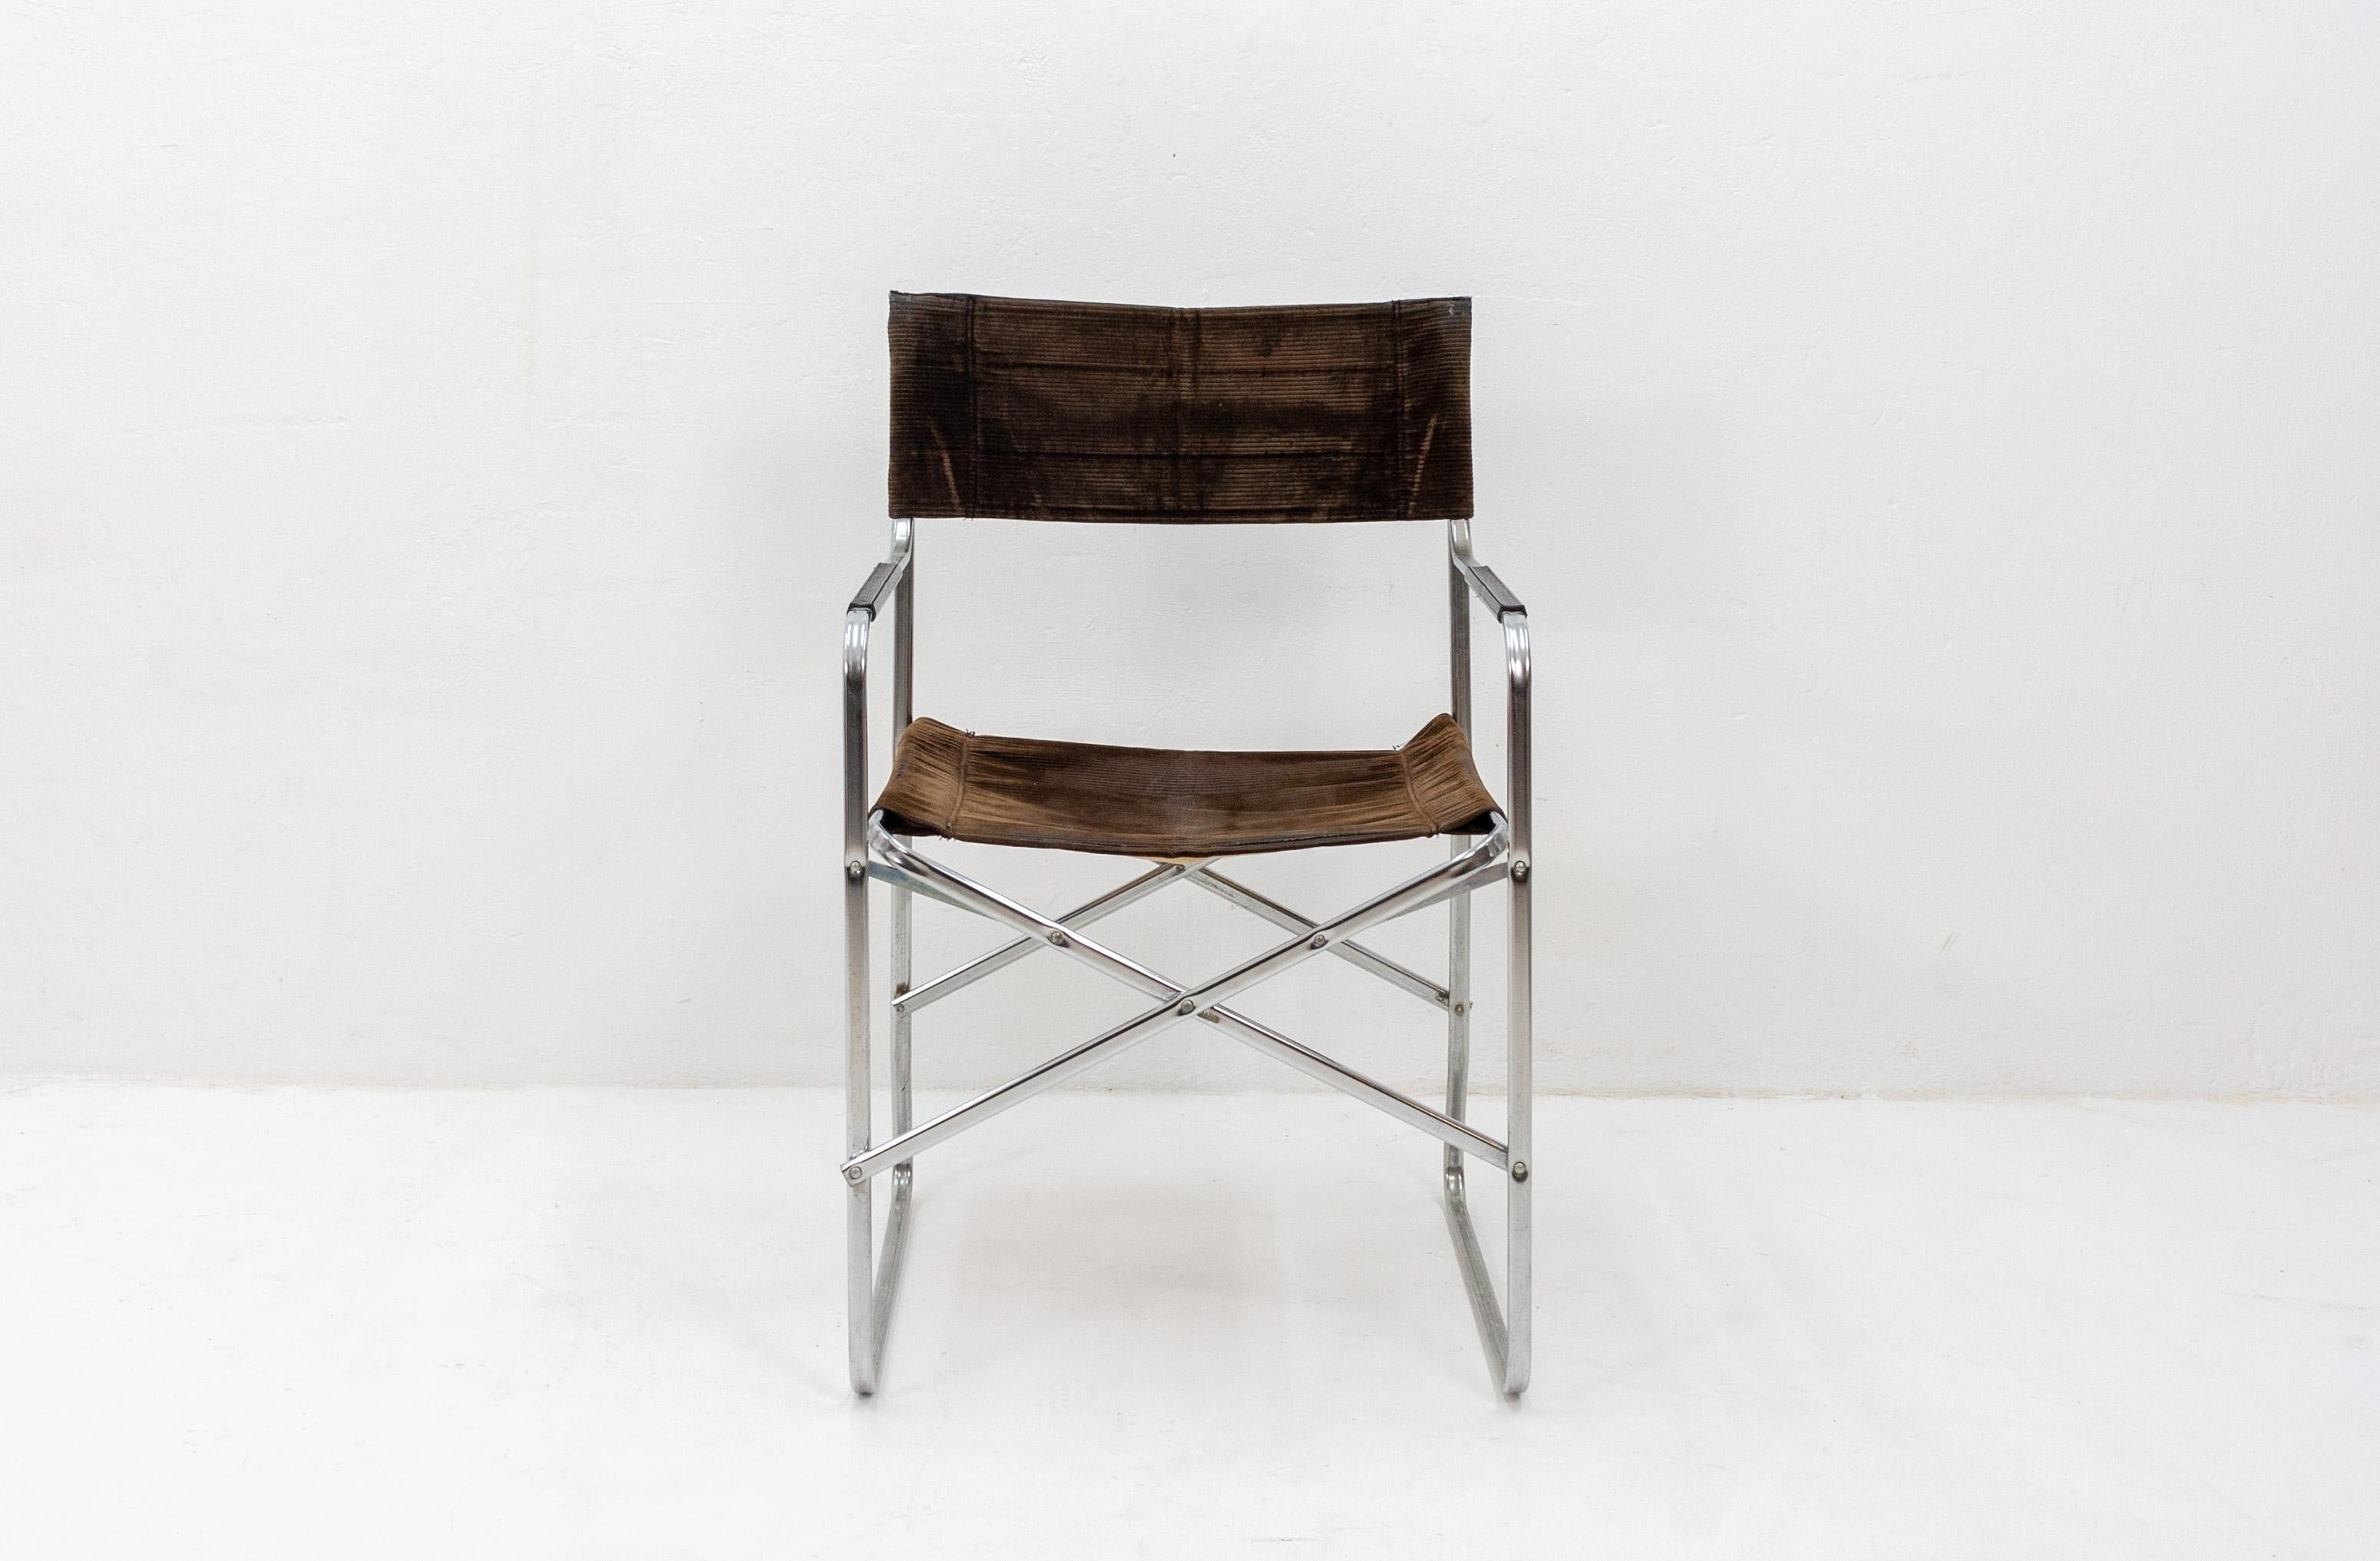 Folding chair upholstered in brown corduroy inspired by Gae Aulenti's 'April' design. Made in Italy, 1960s.